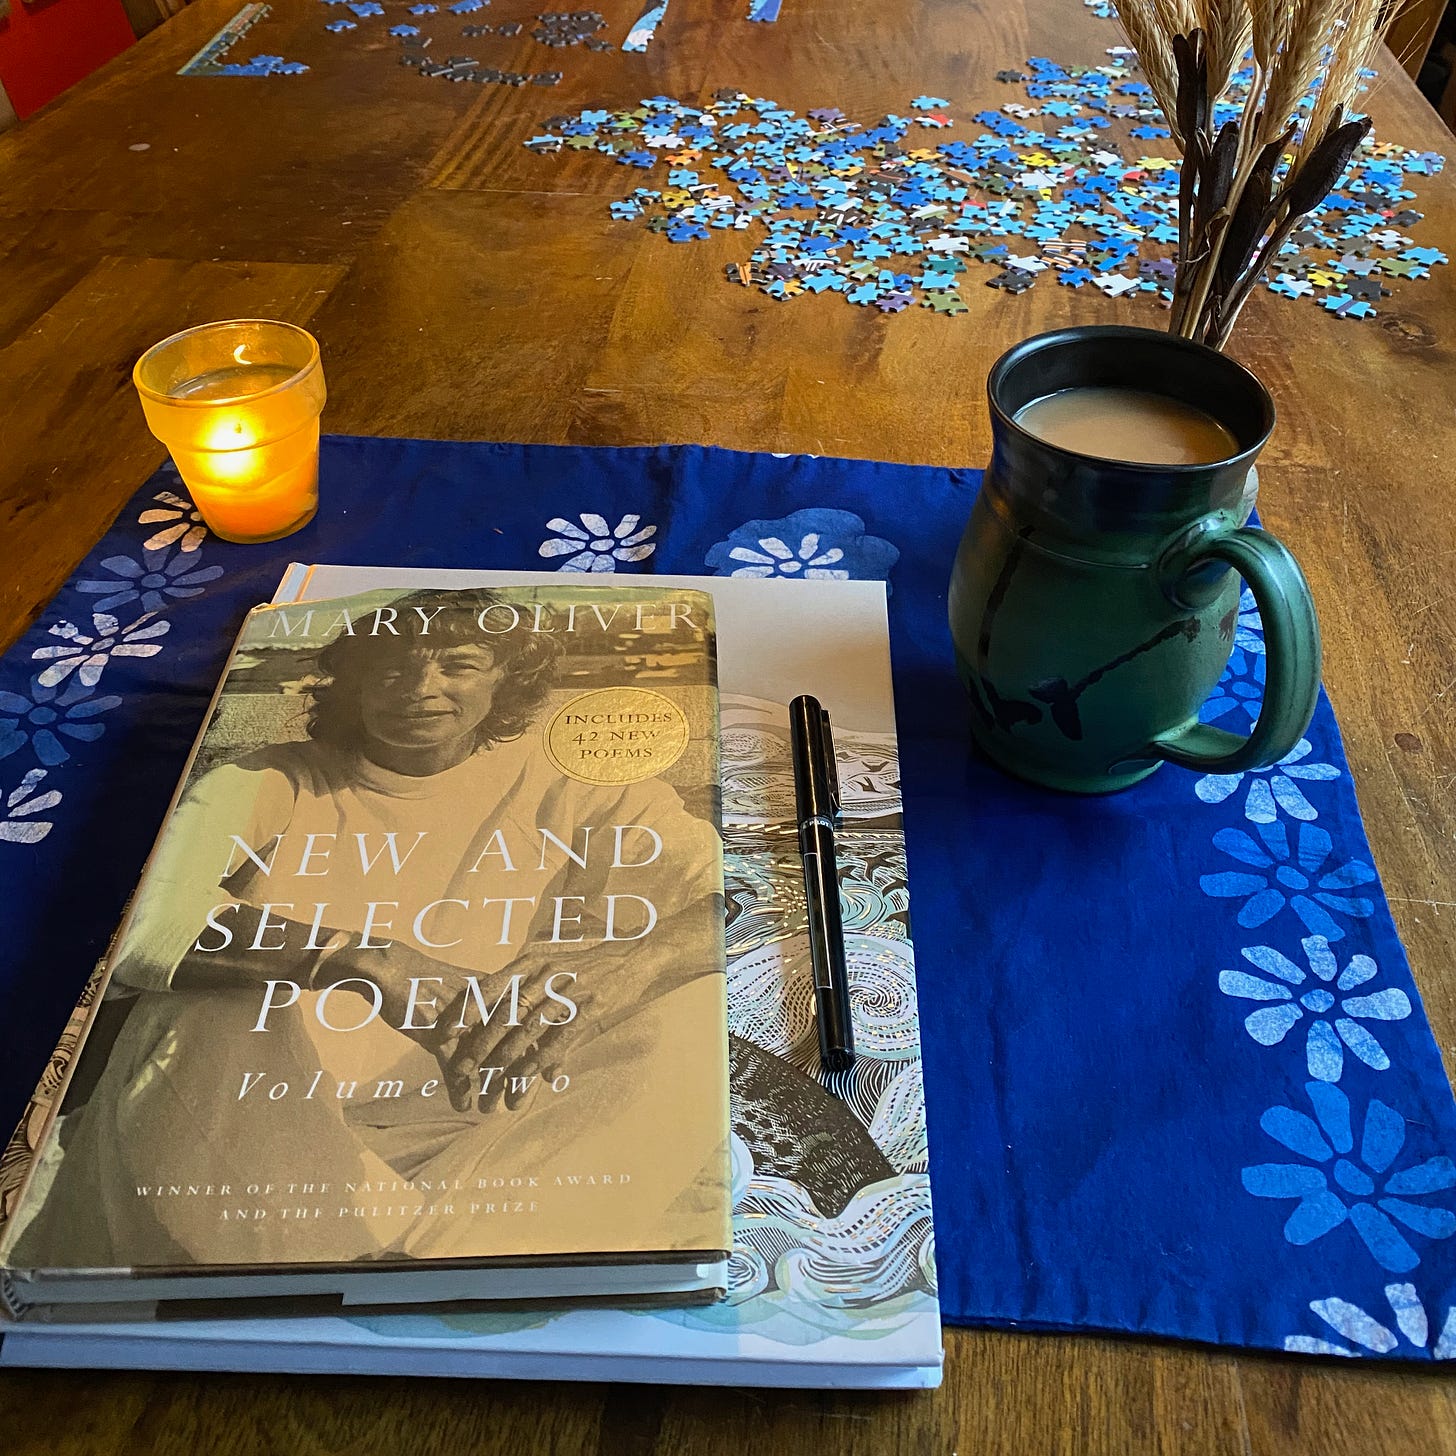 A notebook, pen, and book of Mary Oliver poems on a blue placemat next to a candle, mug of tea, and jar of dried grasses.